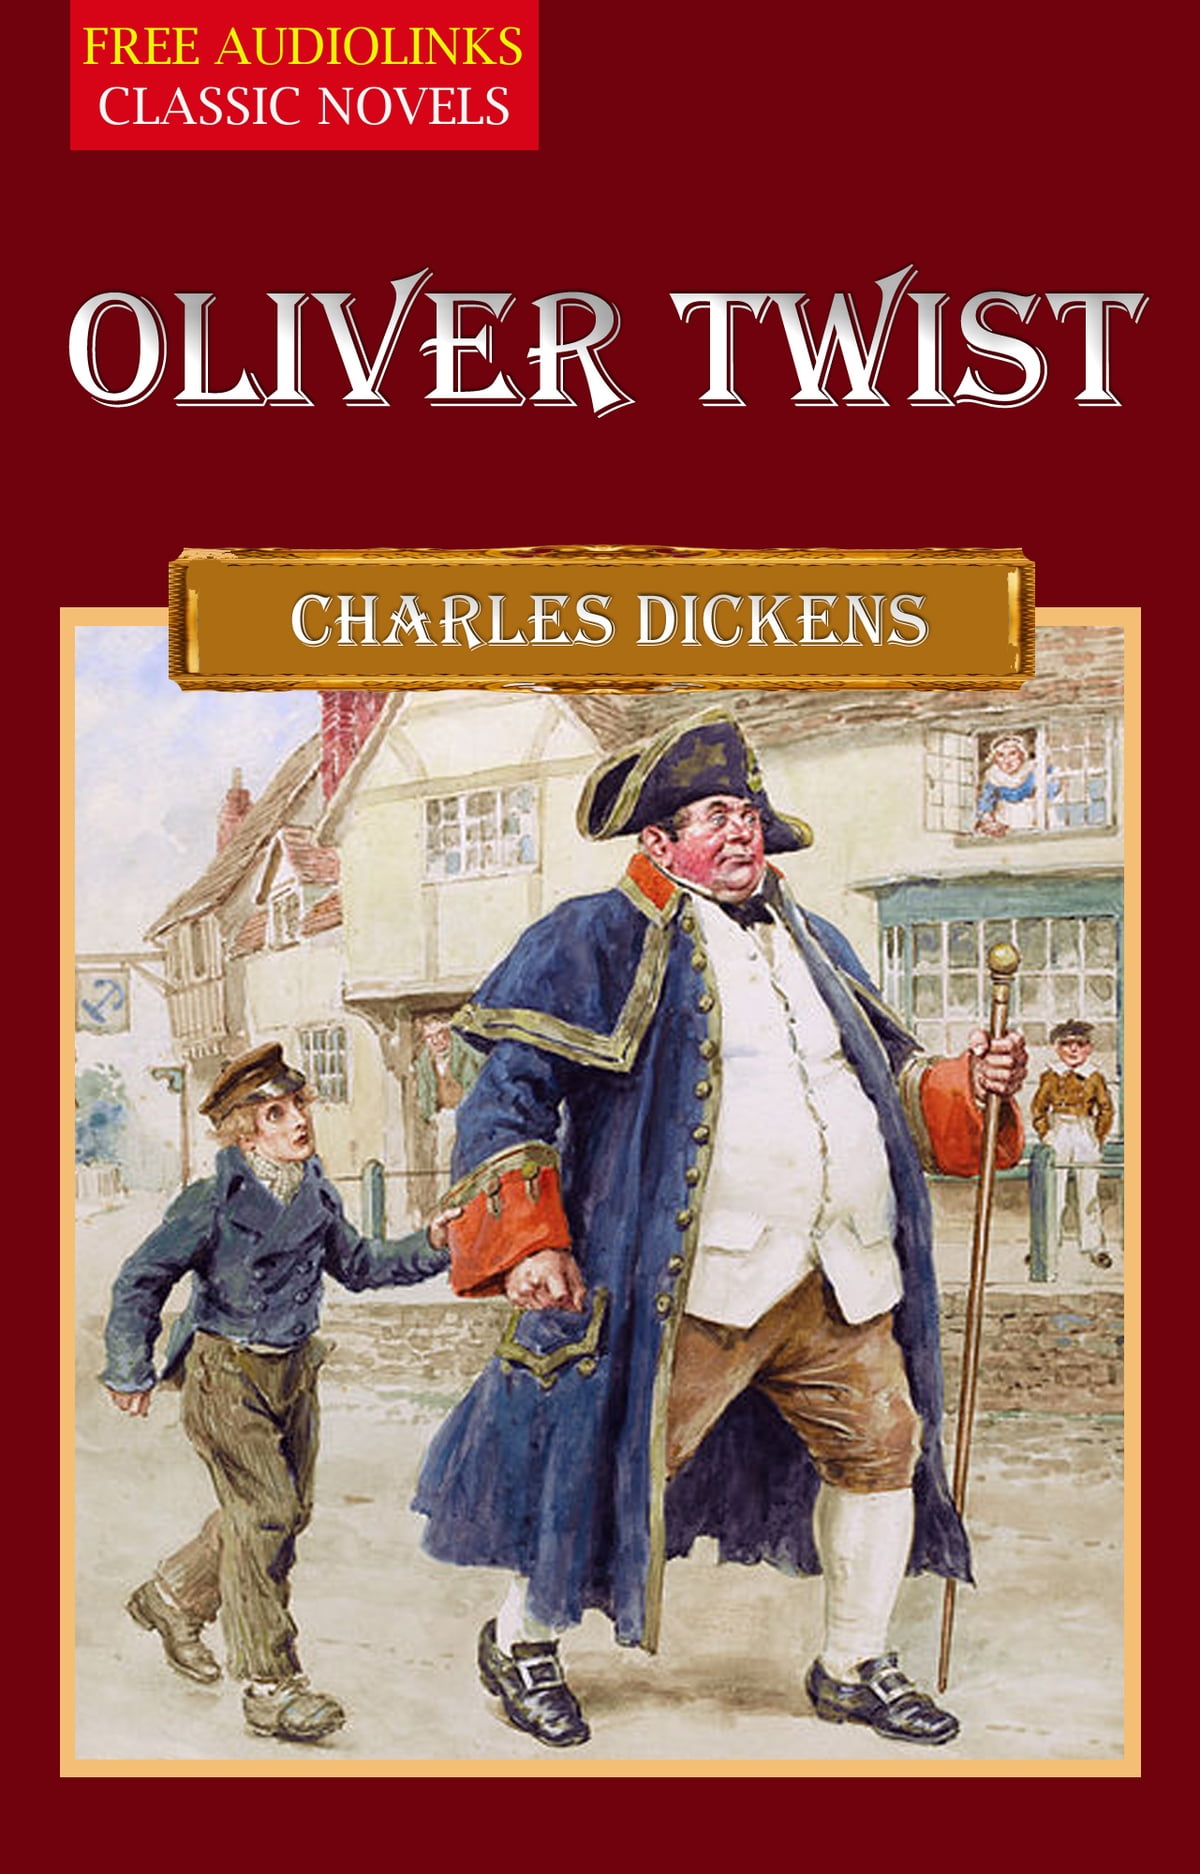 book review of oliver twist in 200 words